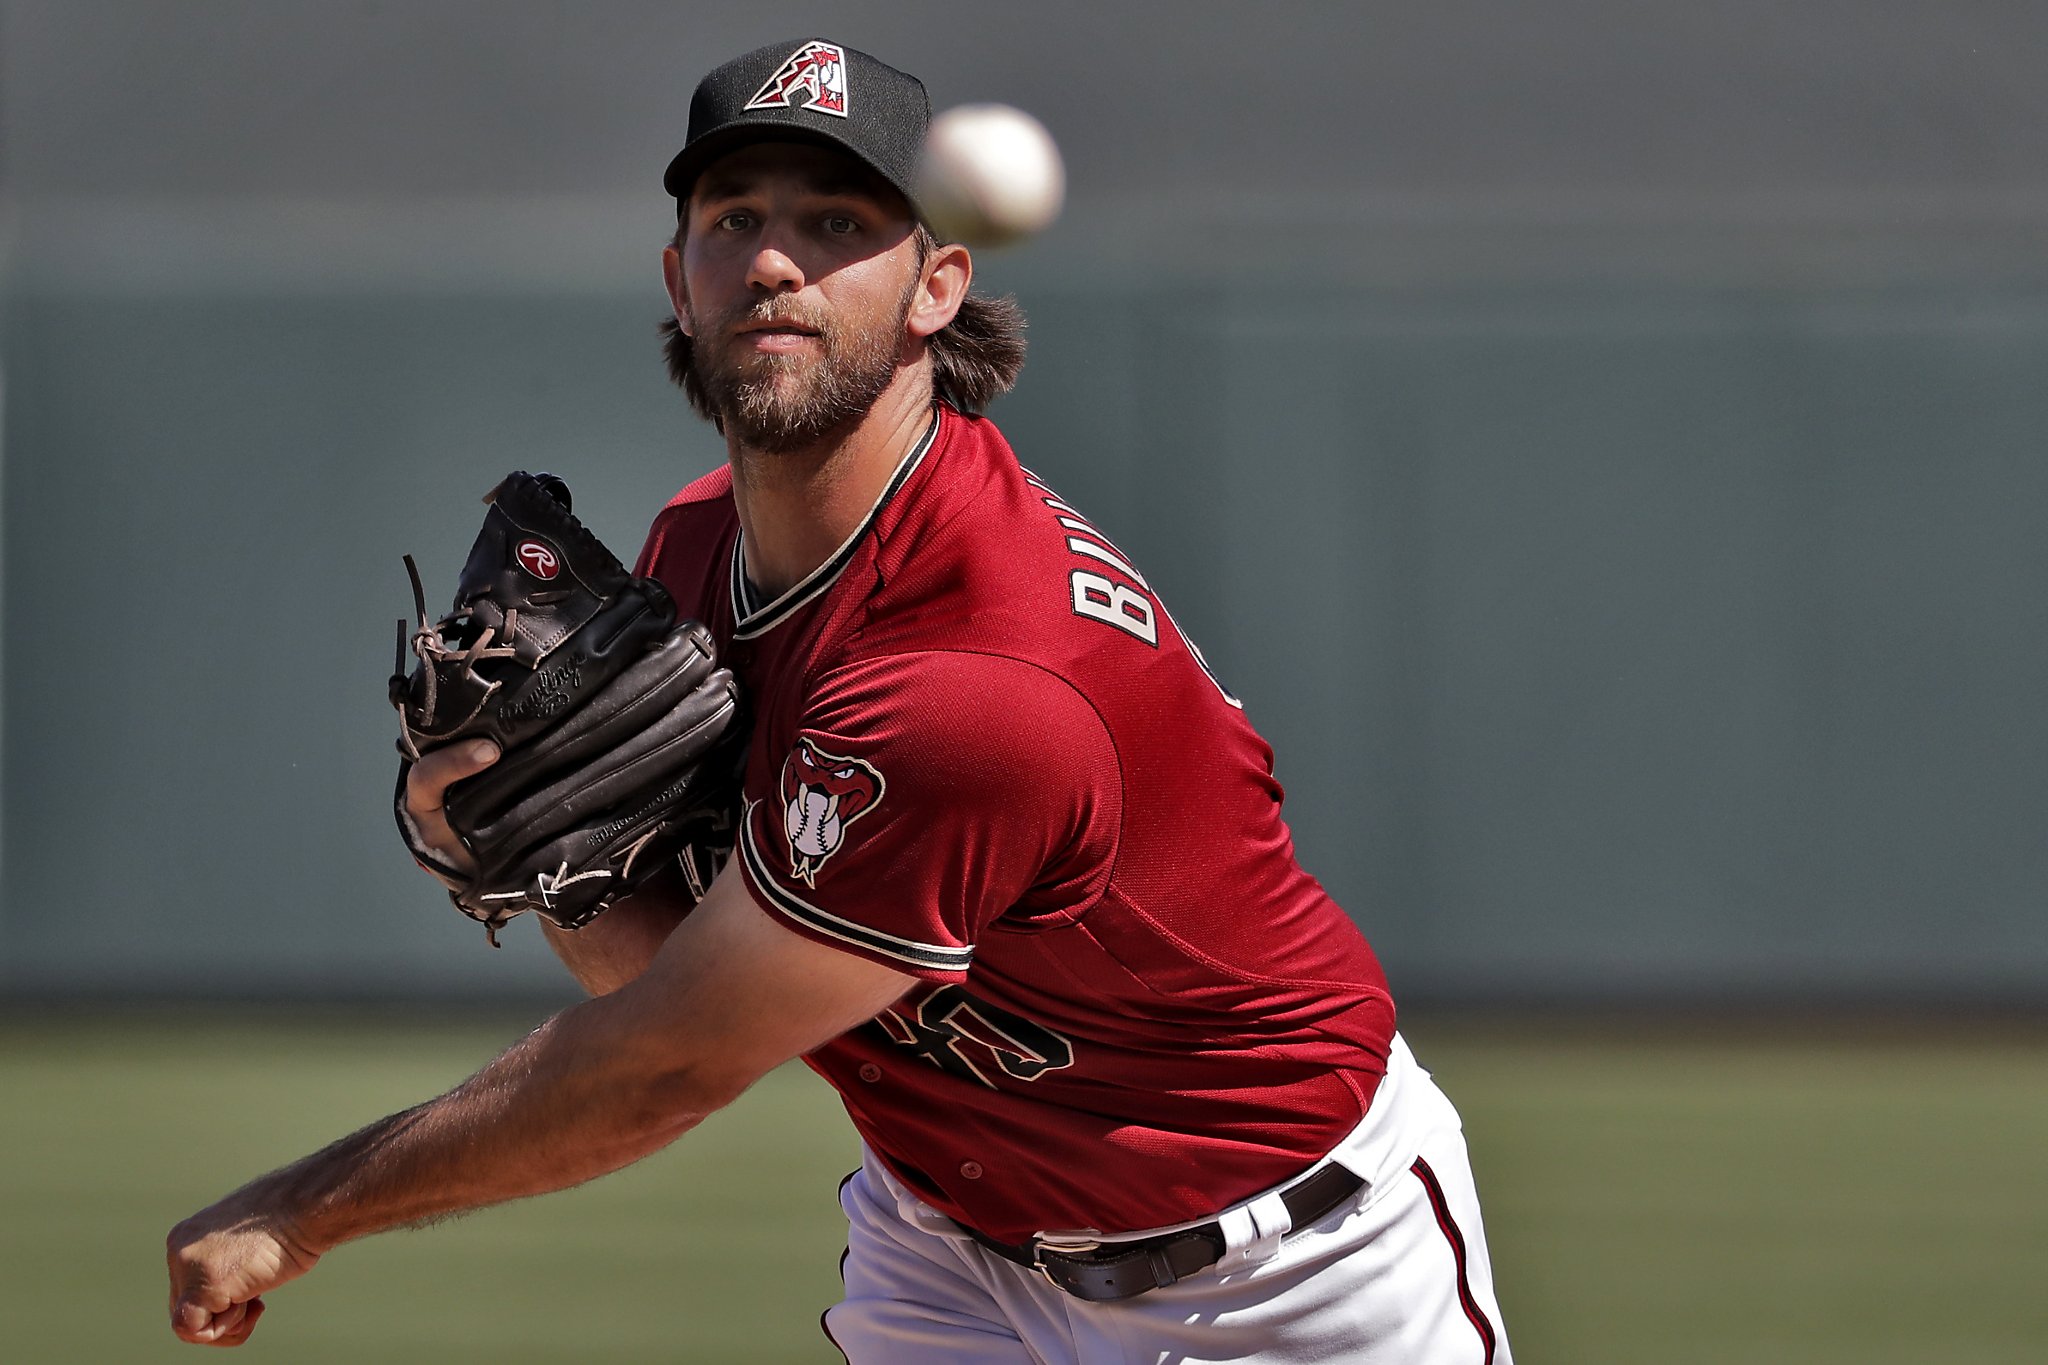 Madison Bumgarner refuses to get roped into rodeo talk after fine